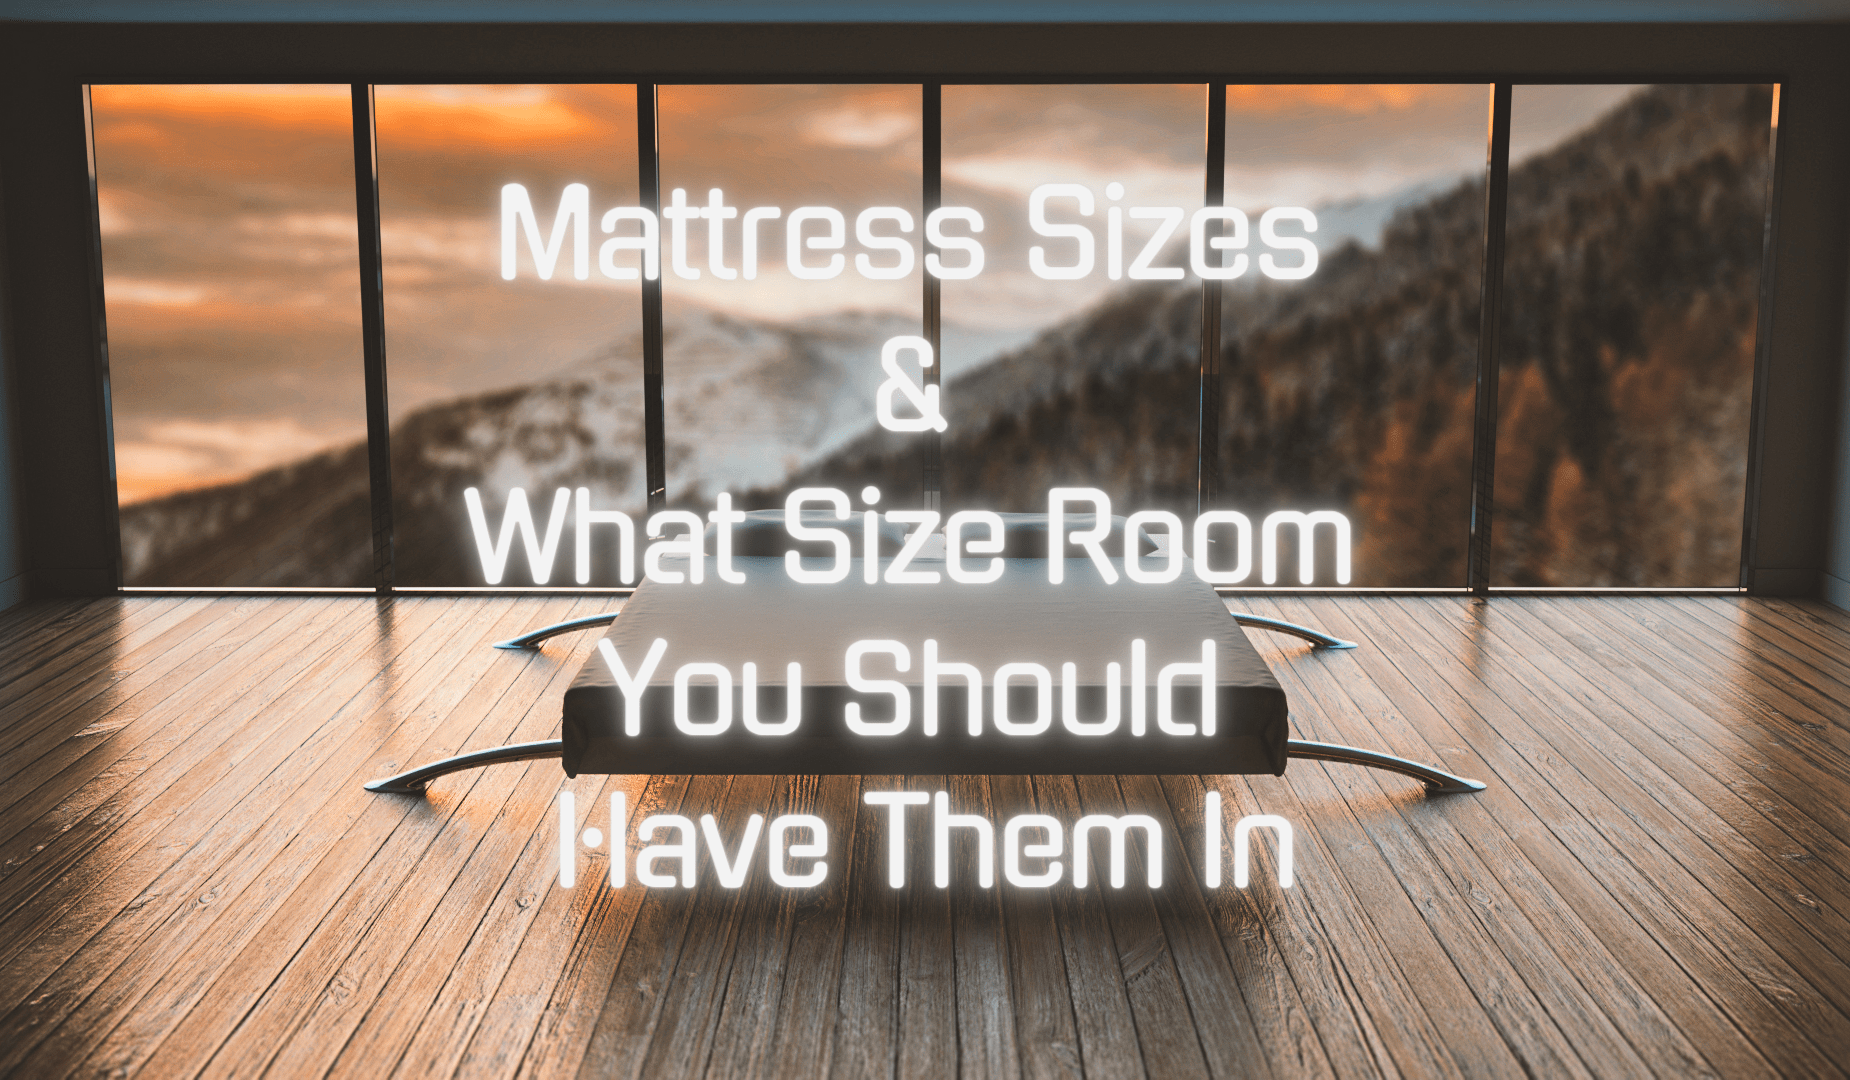 Mattress Sizes & What Size Room You Should Have Them In